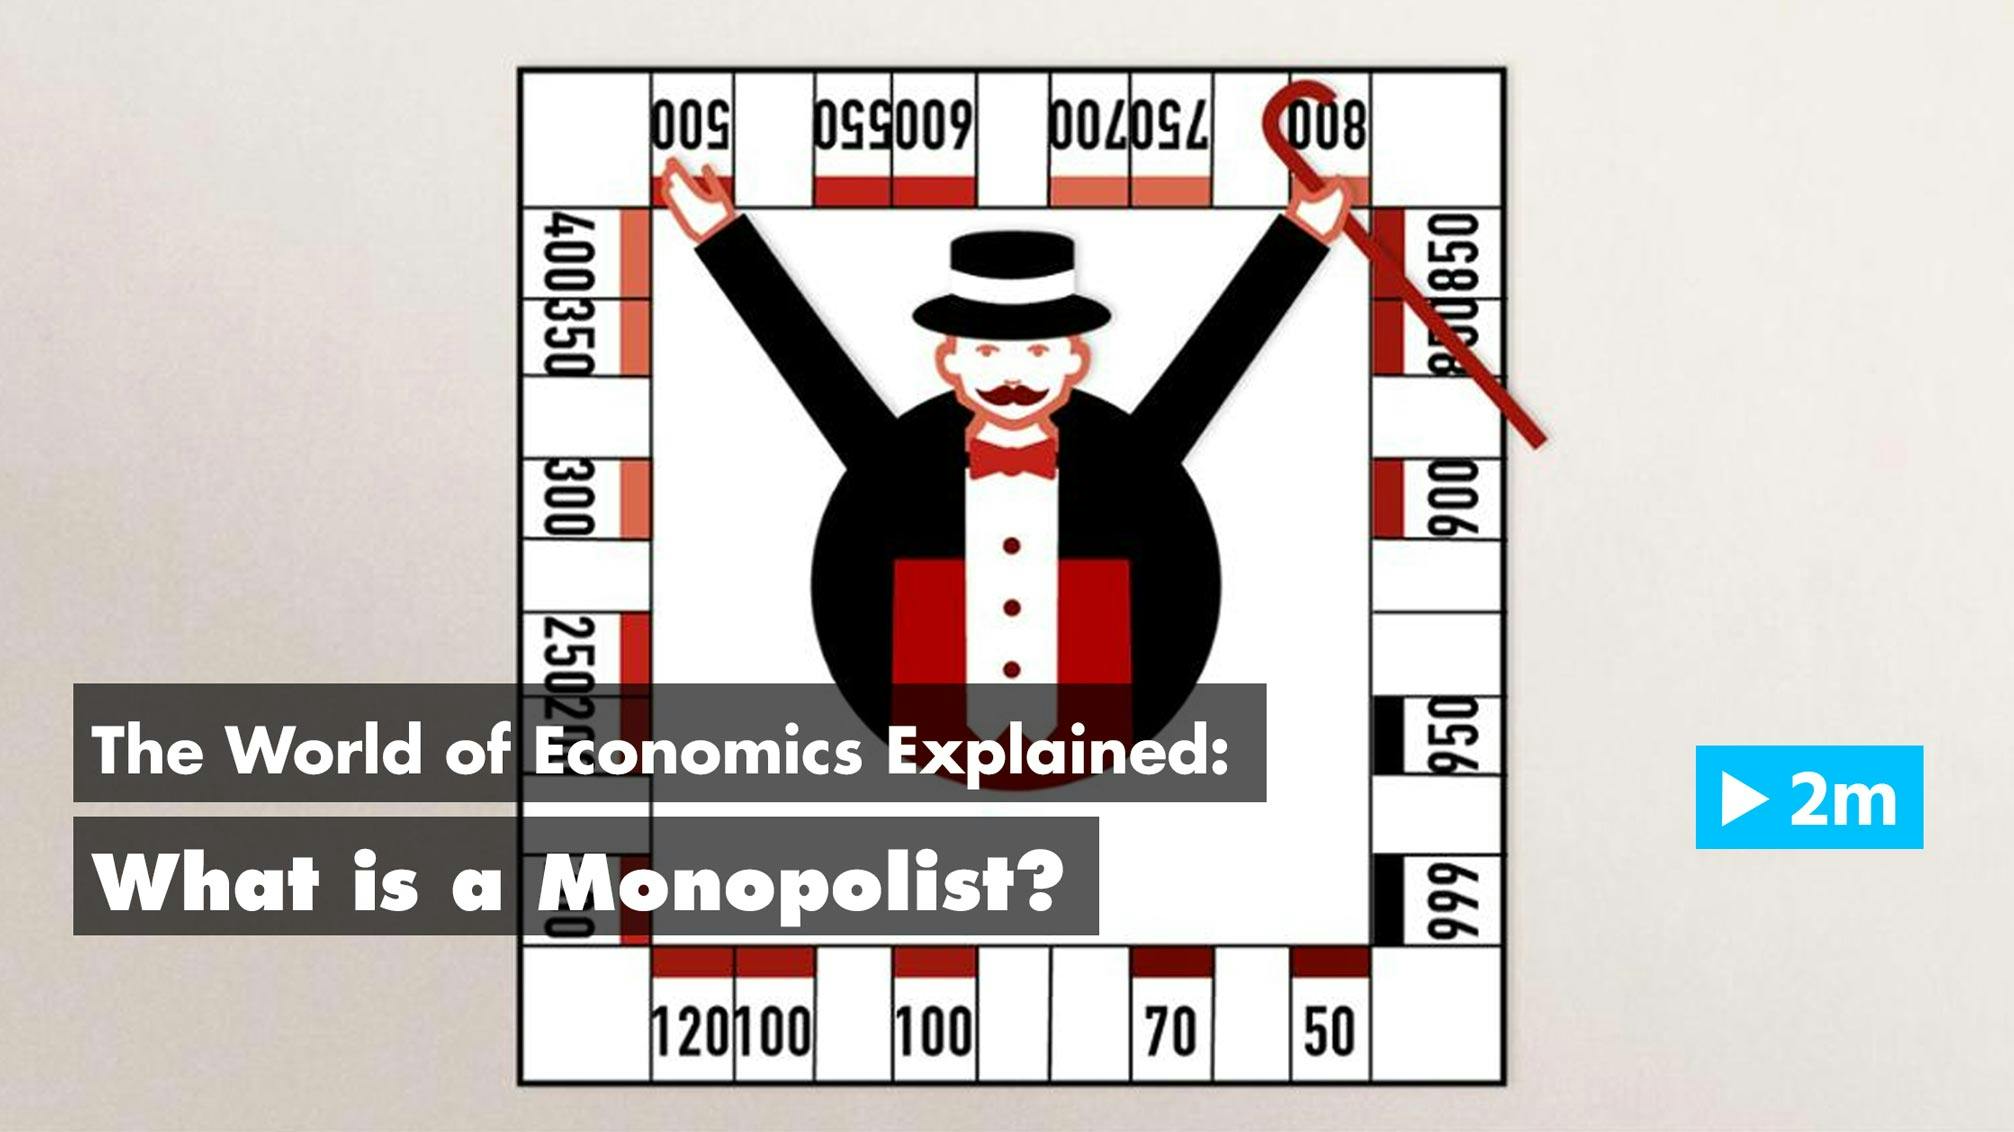 The World of Economics Explained: What is a monopolist?